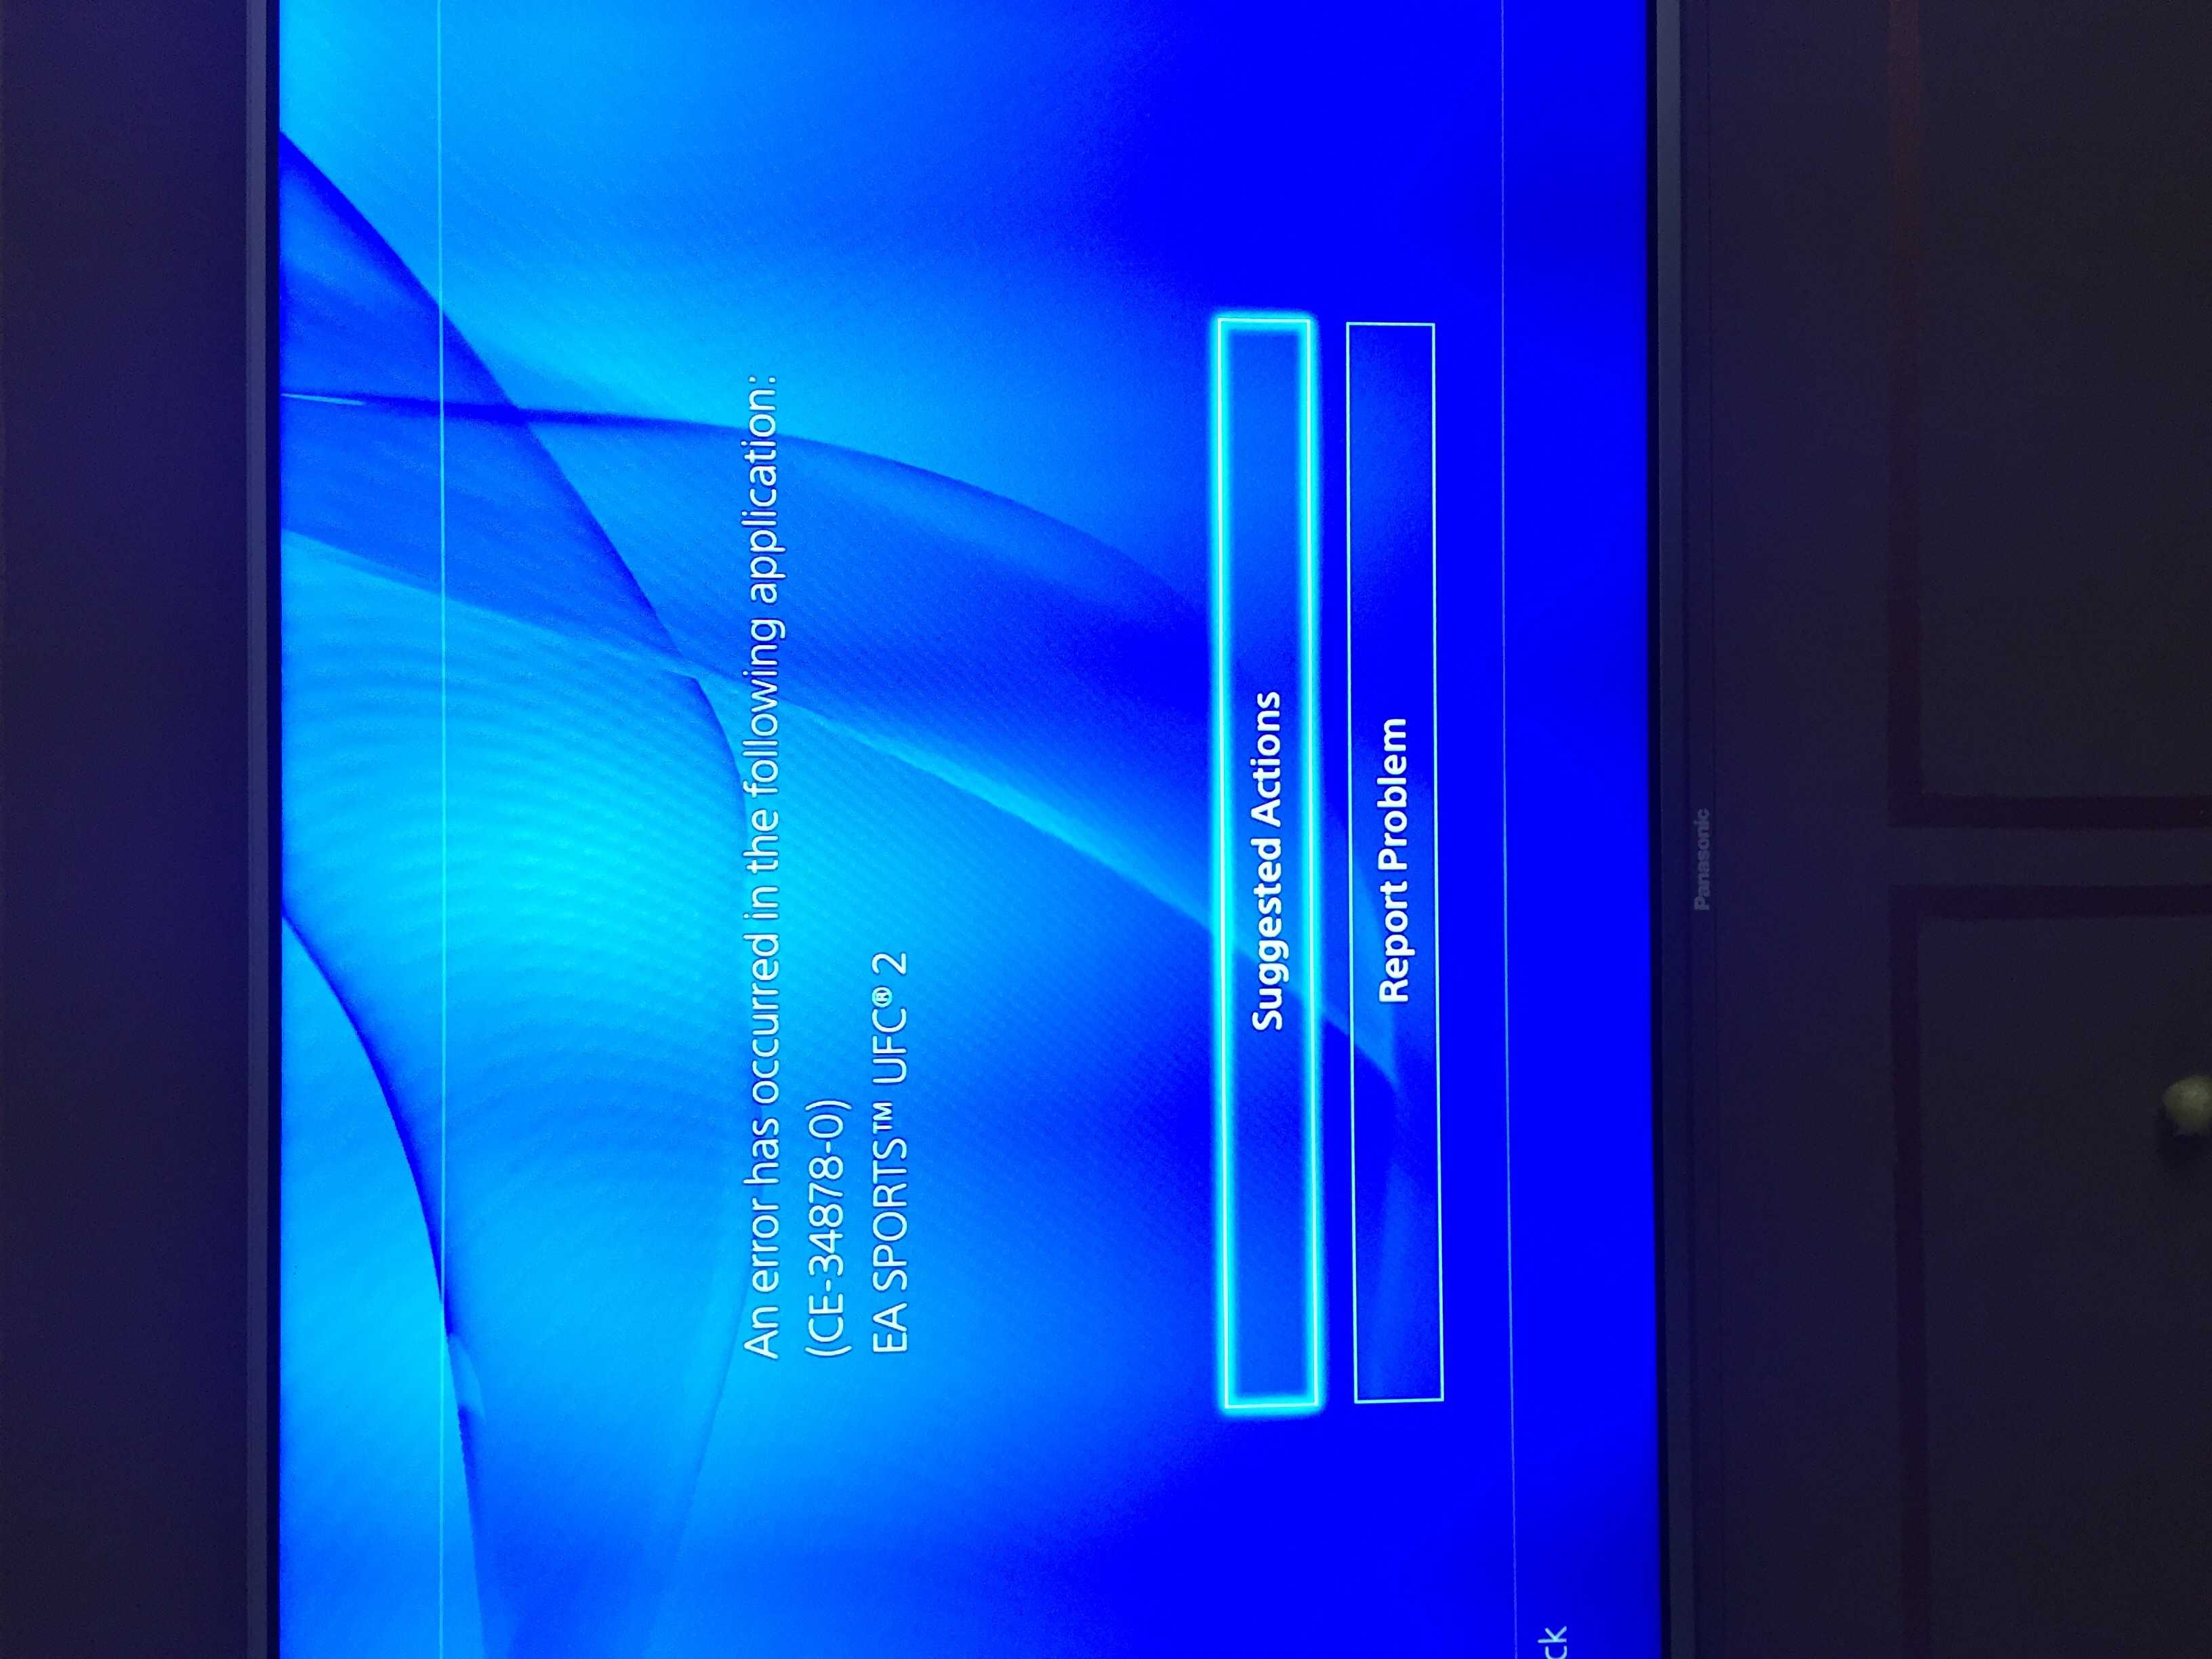 Ps4 error ce-34878-0 fix - 2020 solved [100% fixed] with video